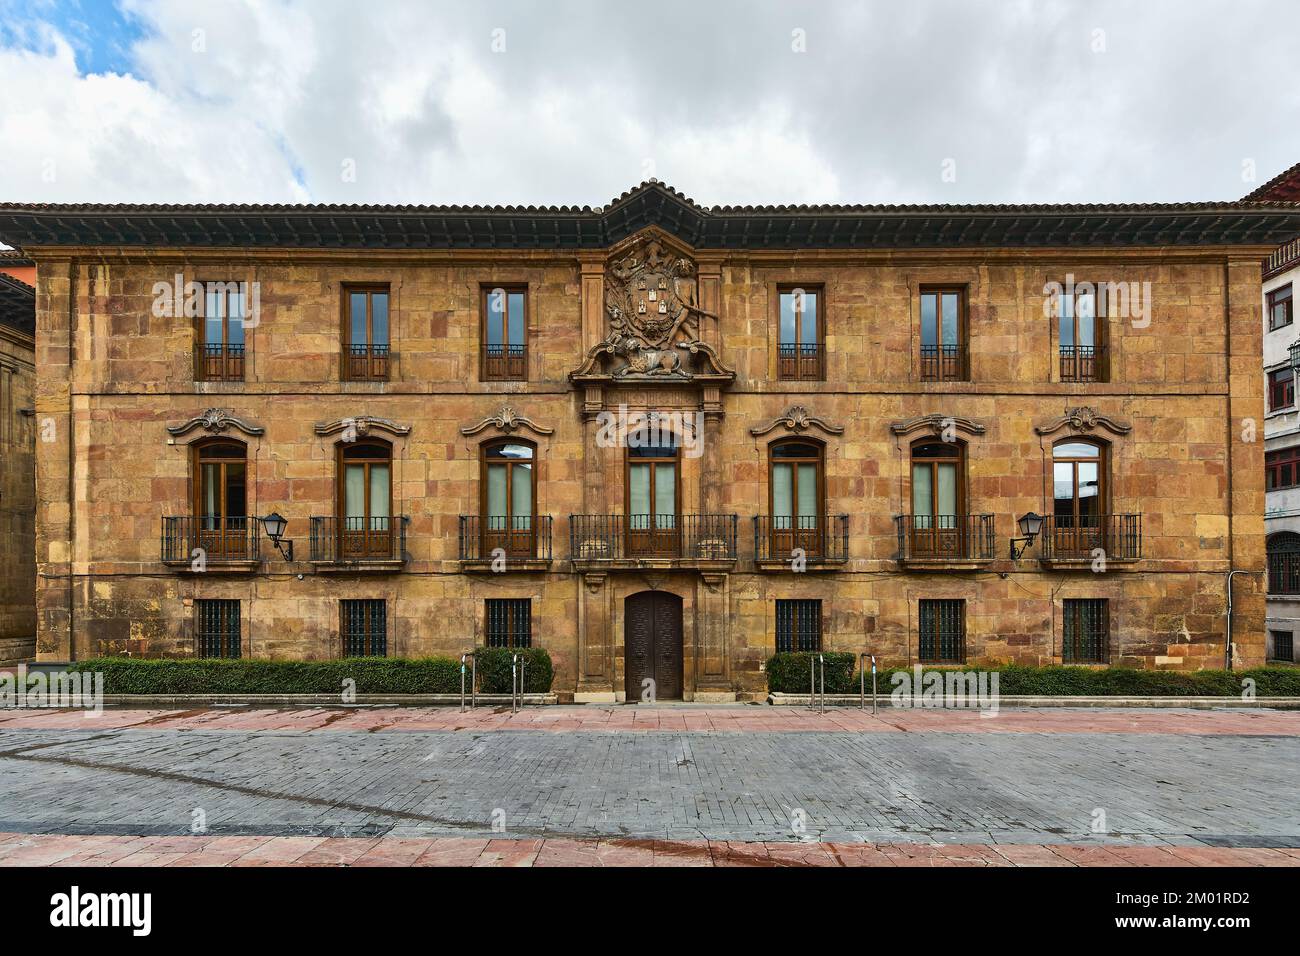 Facade of the Valdecarzana palace built between 1627-1629 by Diego de Miranda in the cathedral square of the city of Oviedo, Asturias, Spain. Stock Photo